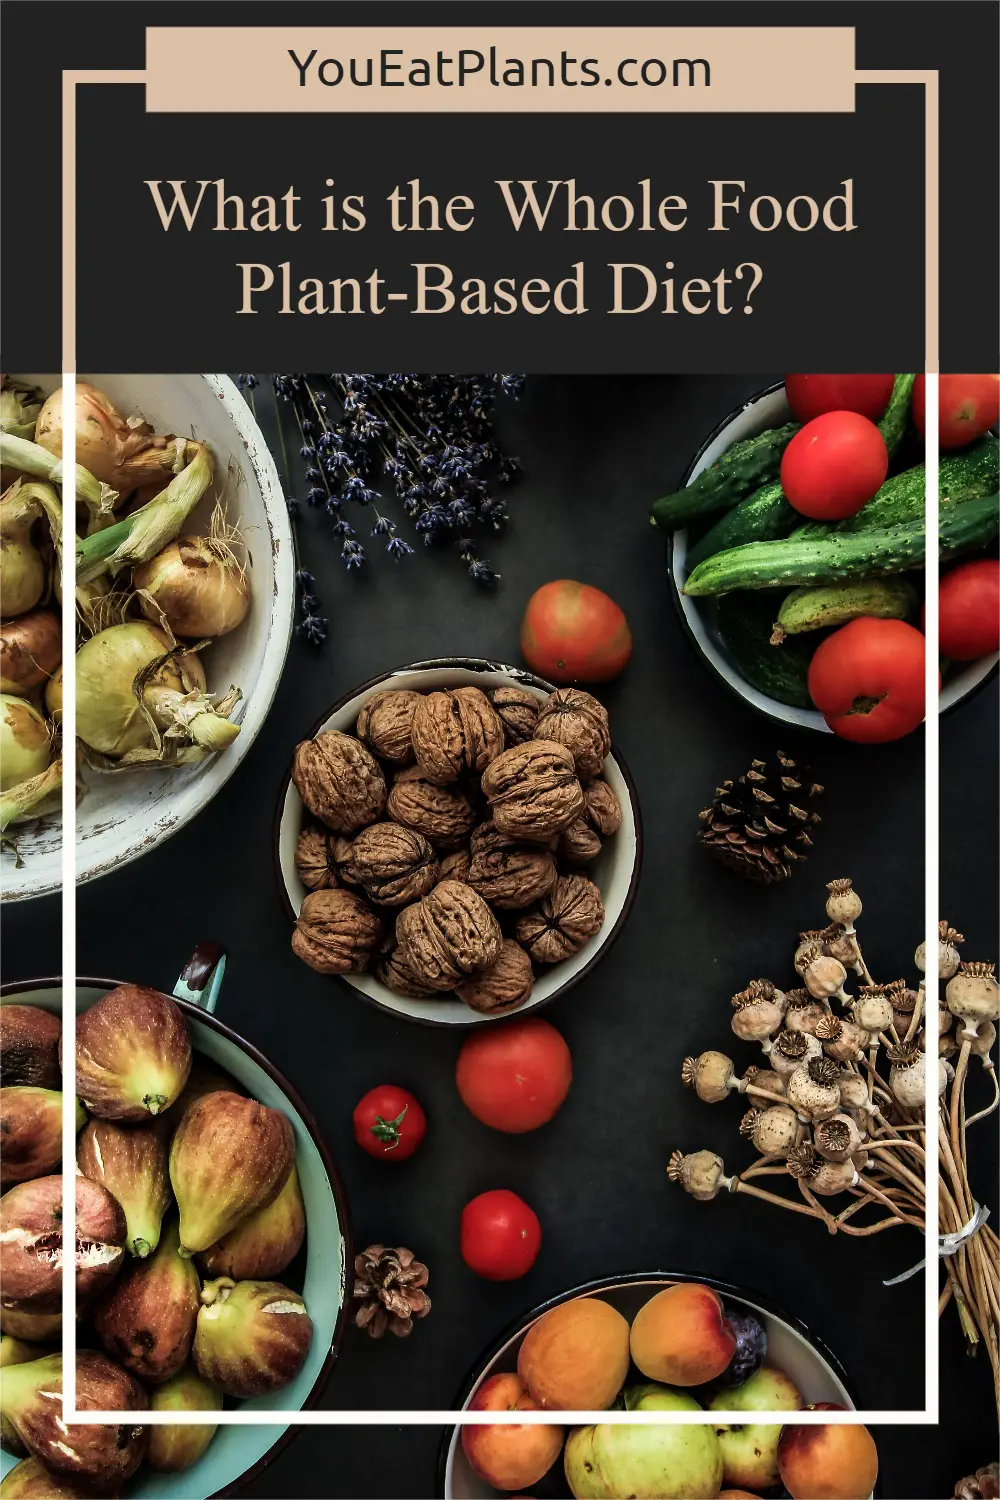 What is the Whole Food Plant-Based Diet?